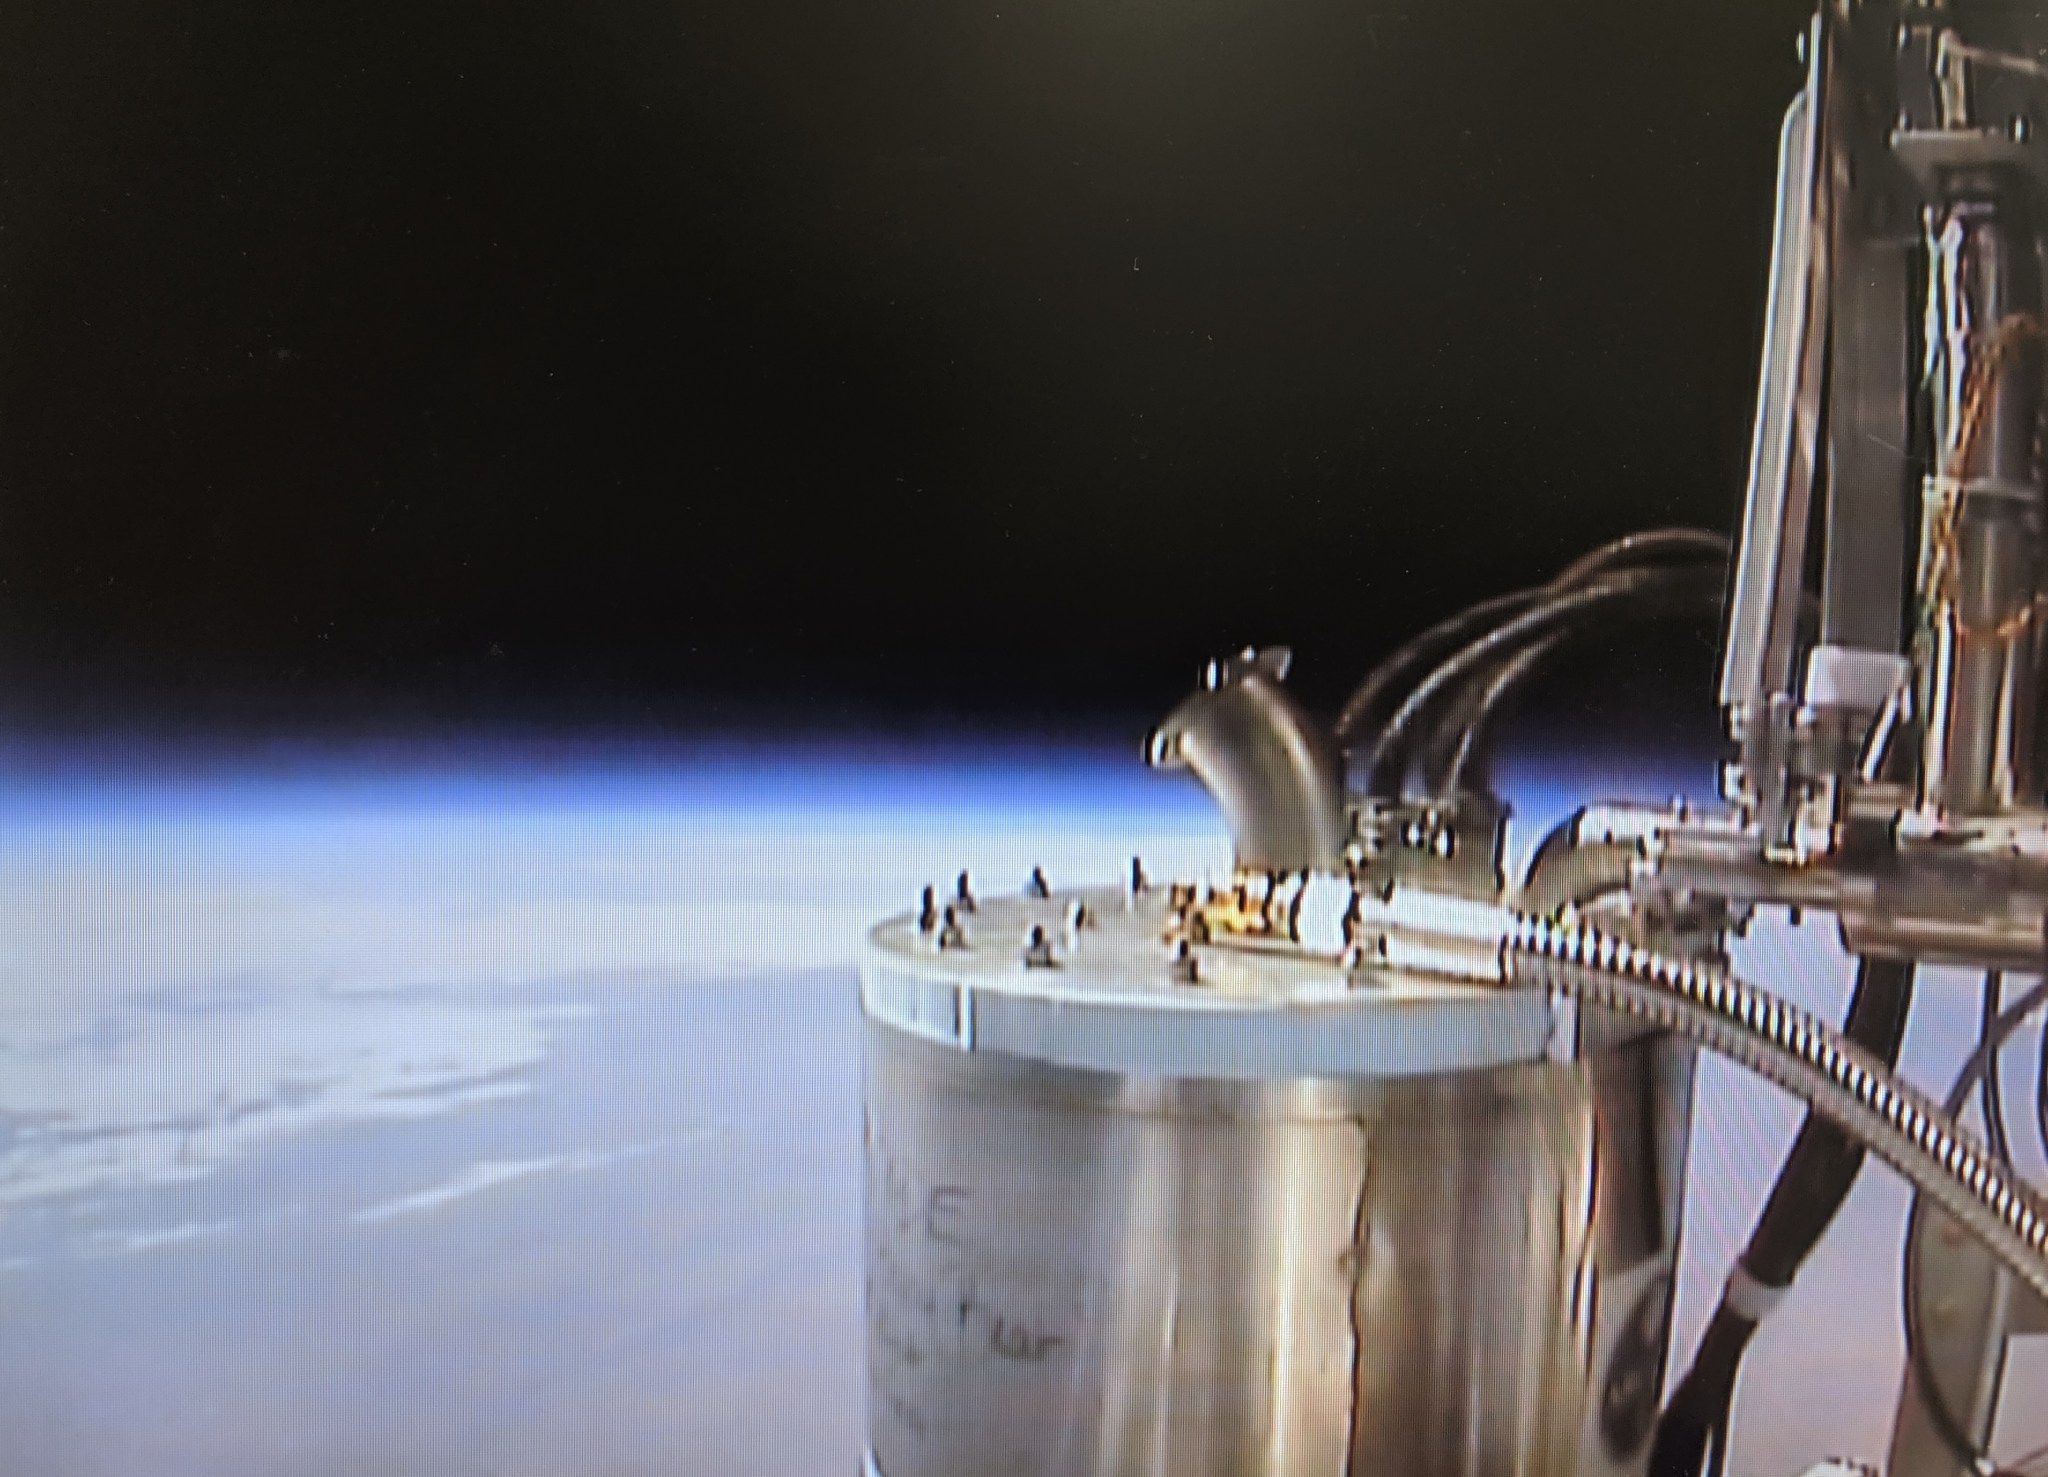 BOBCAT hardware used to demonstrate the successful transfer of cryogenic fluids into a dewar on a balloon demo. The image shows the tech above Earth's atmosphere. 